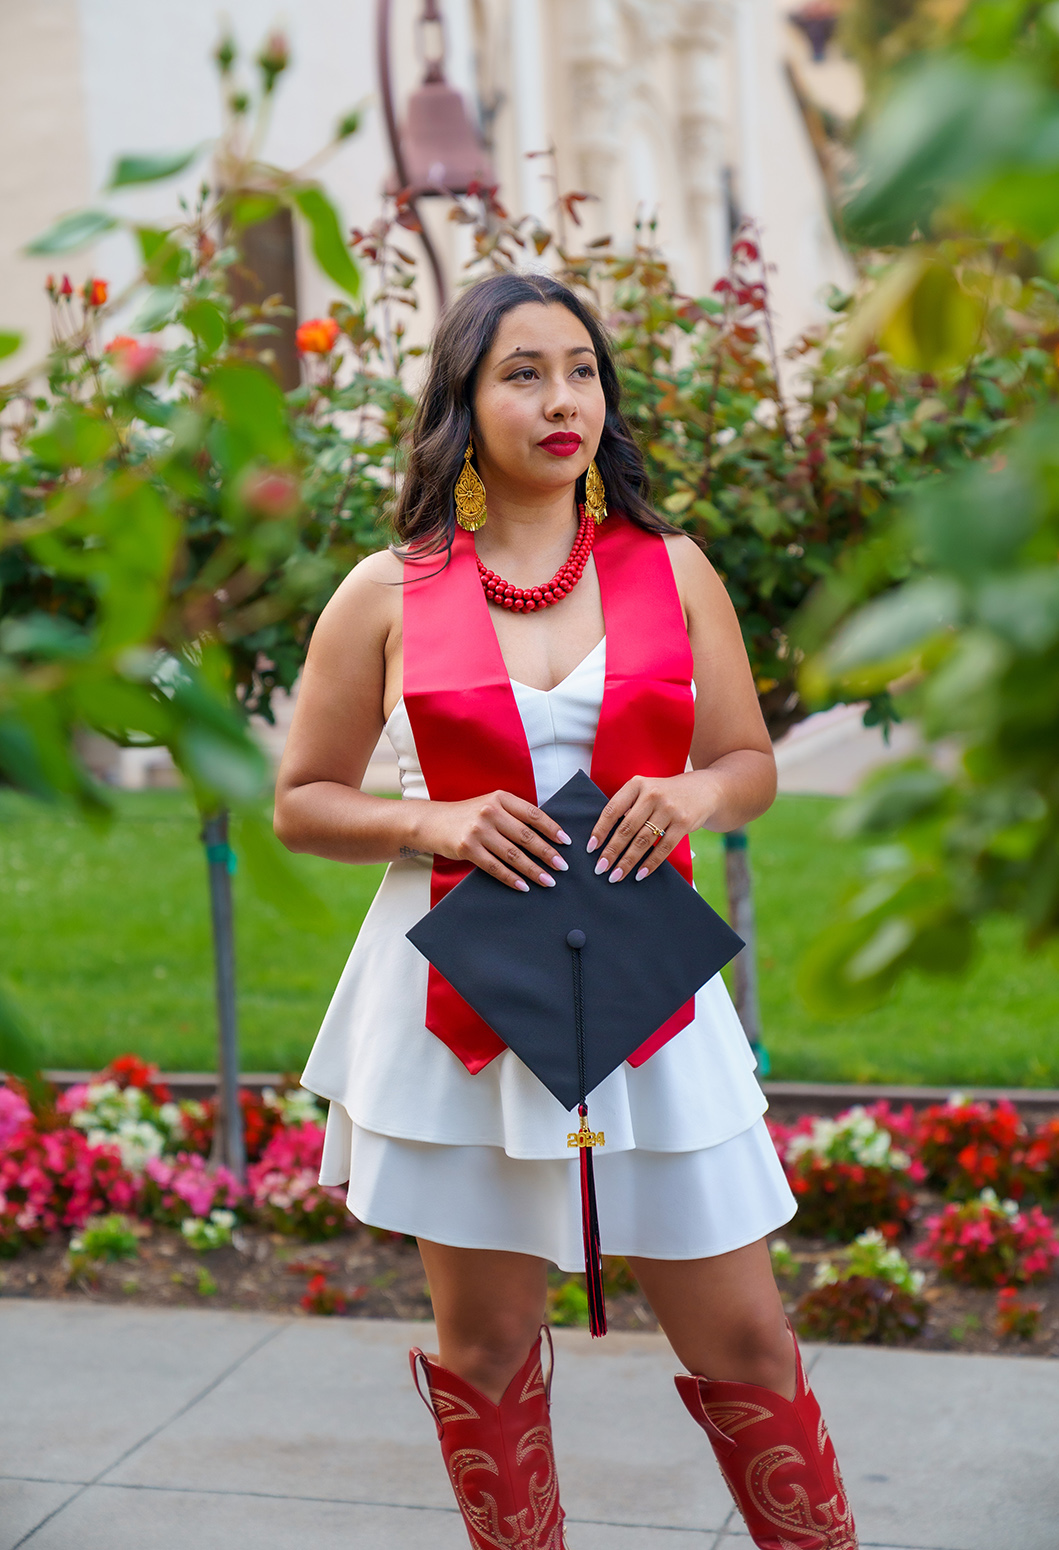 A female student in a white dress holding her graduation cap.